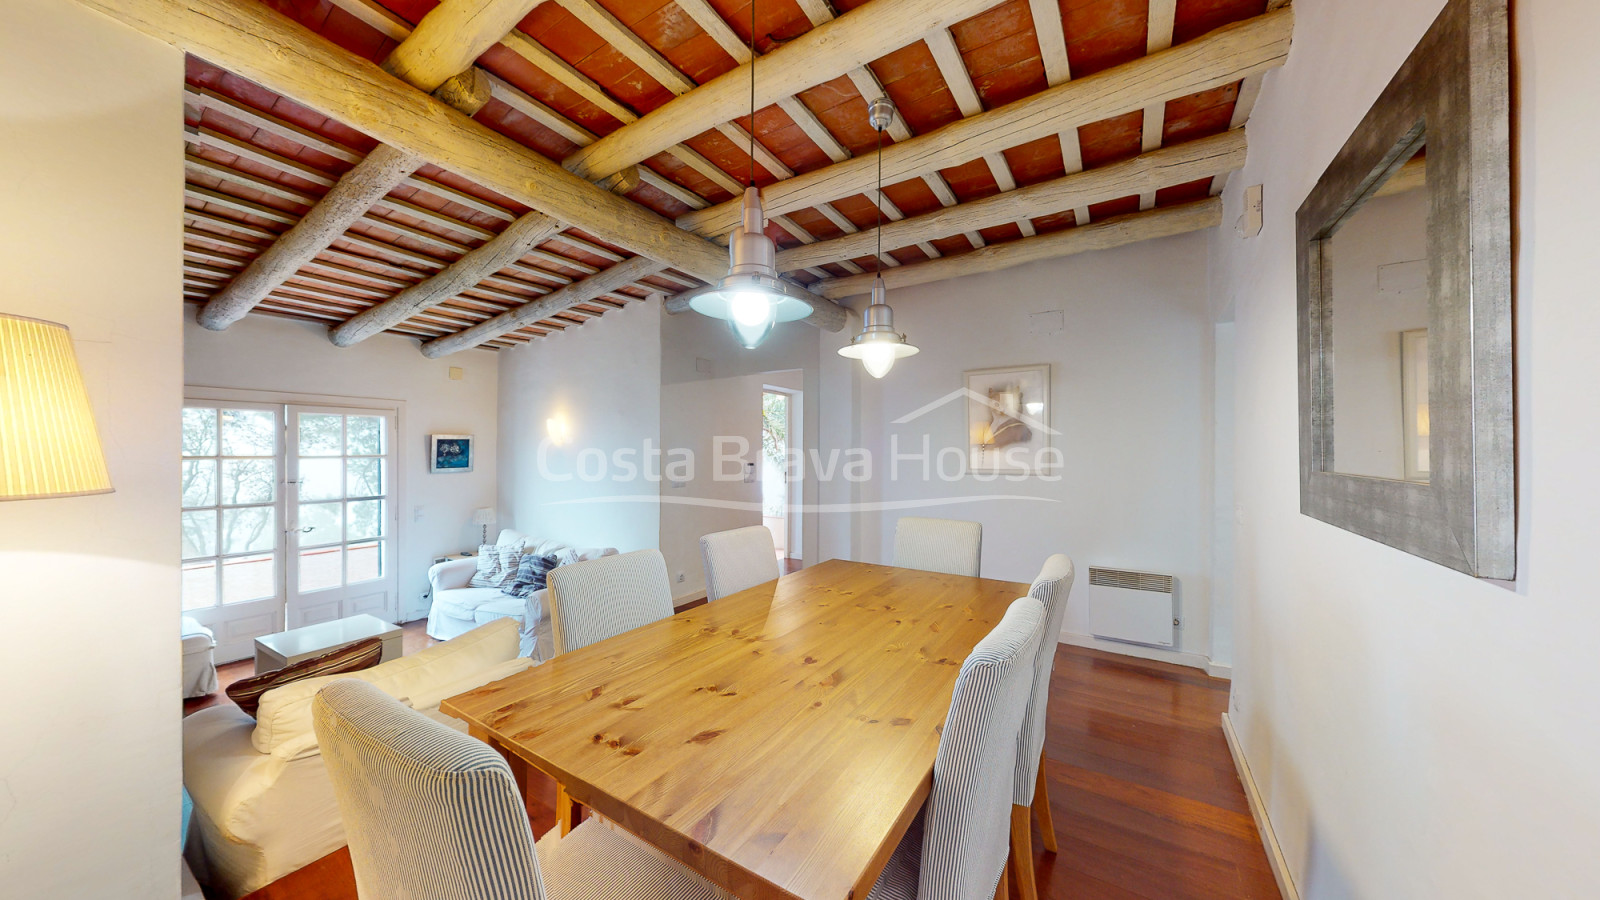 Renovated Mediterranean house 5 minutes from Begur and Palafrugell